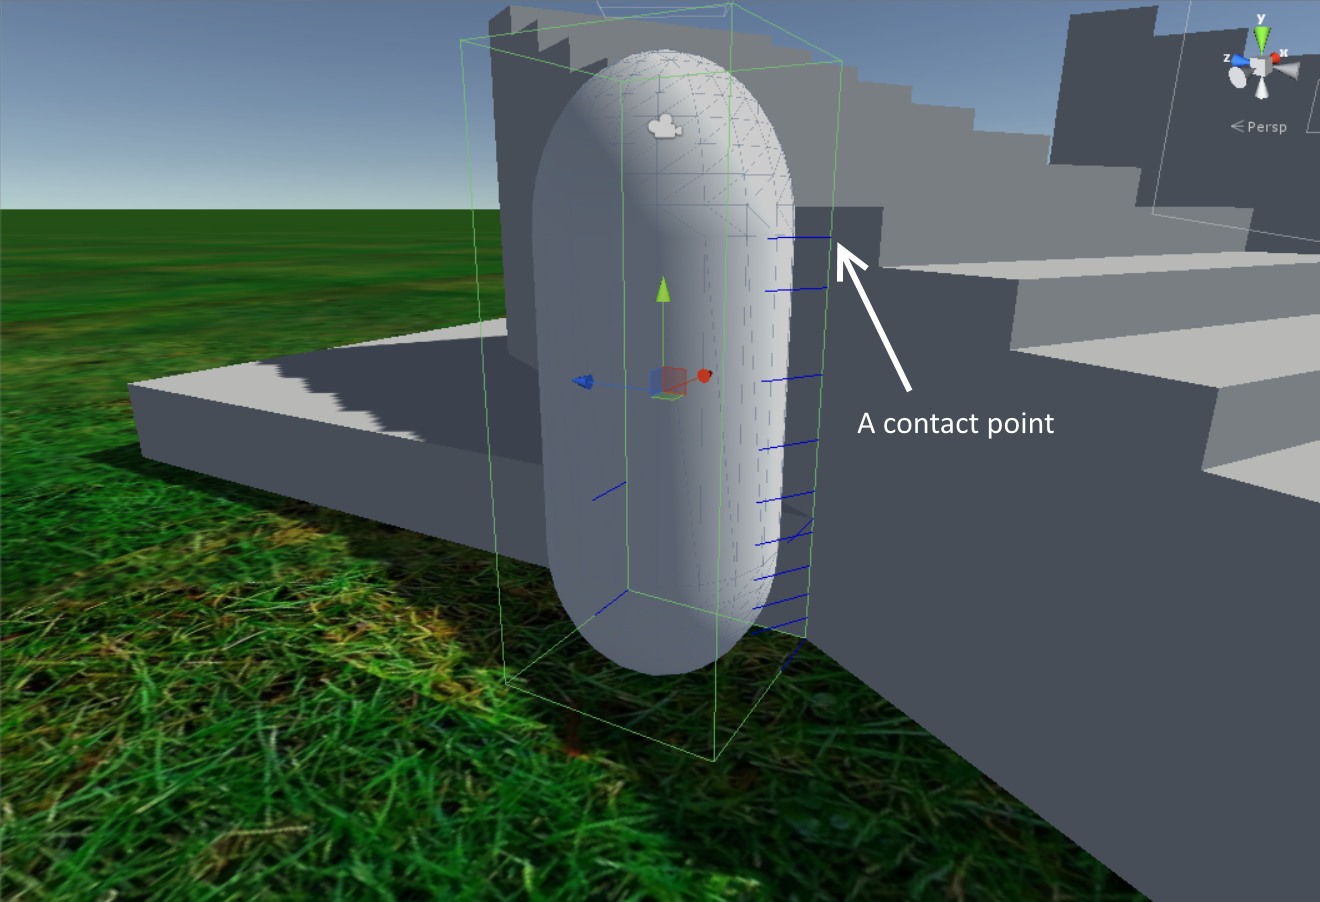 A contact point